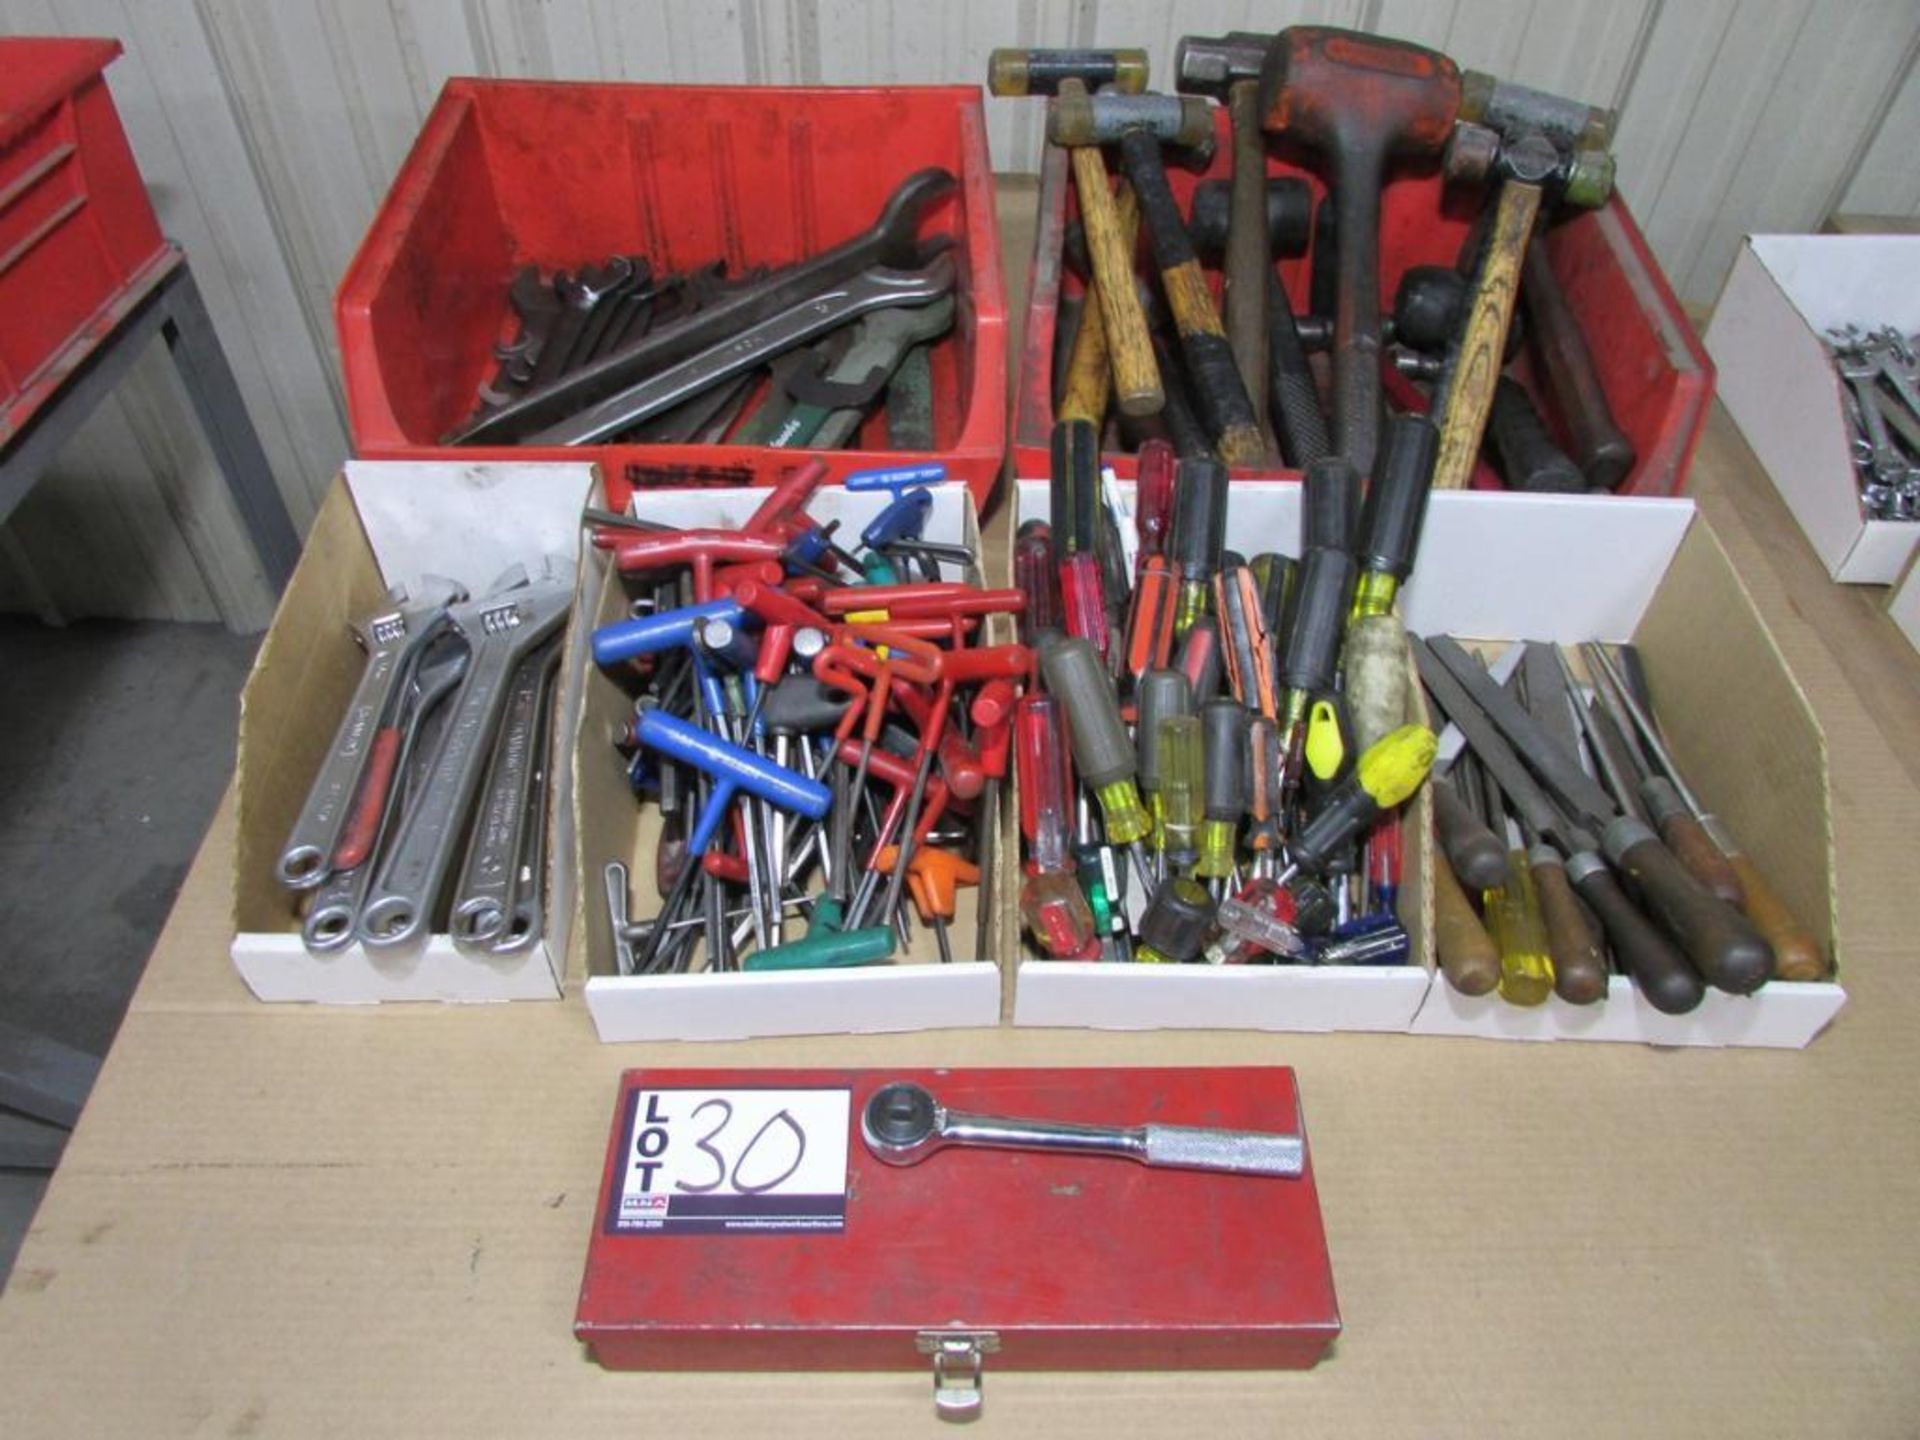 Assorted Hand Tools: Wrenches, Hammers, Files, Drivers, Allen Wrenches, Adjustable Wrenches, Ratchet